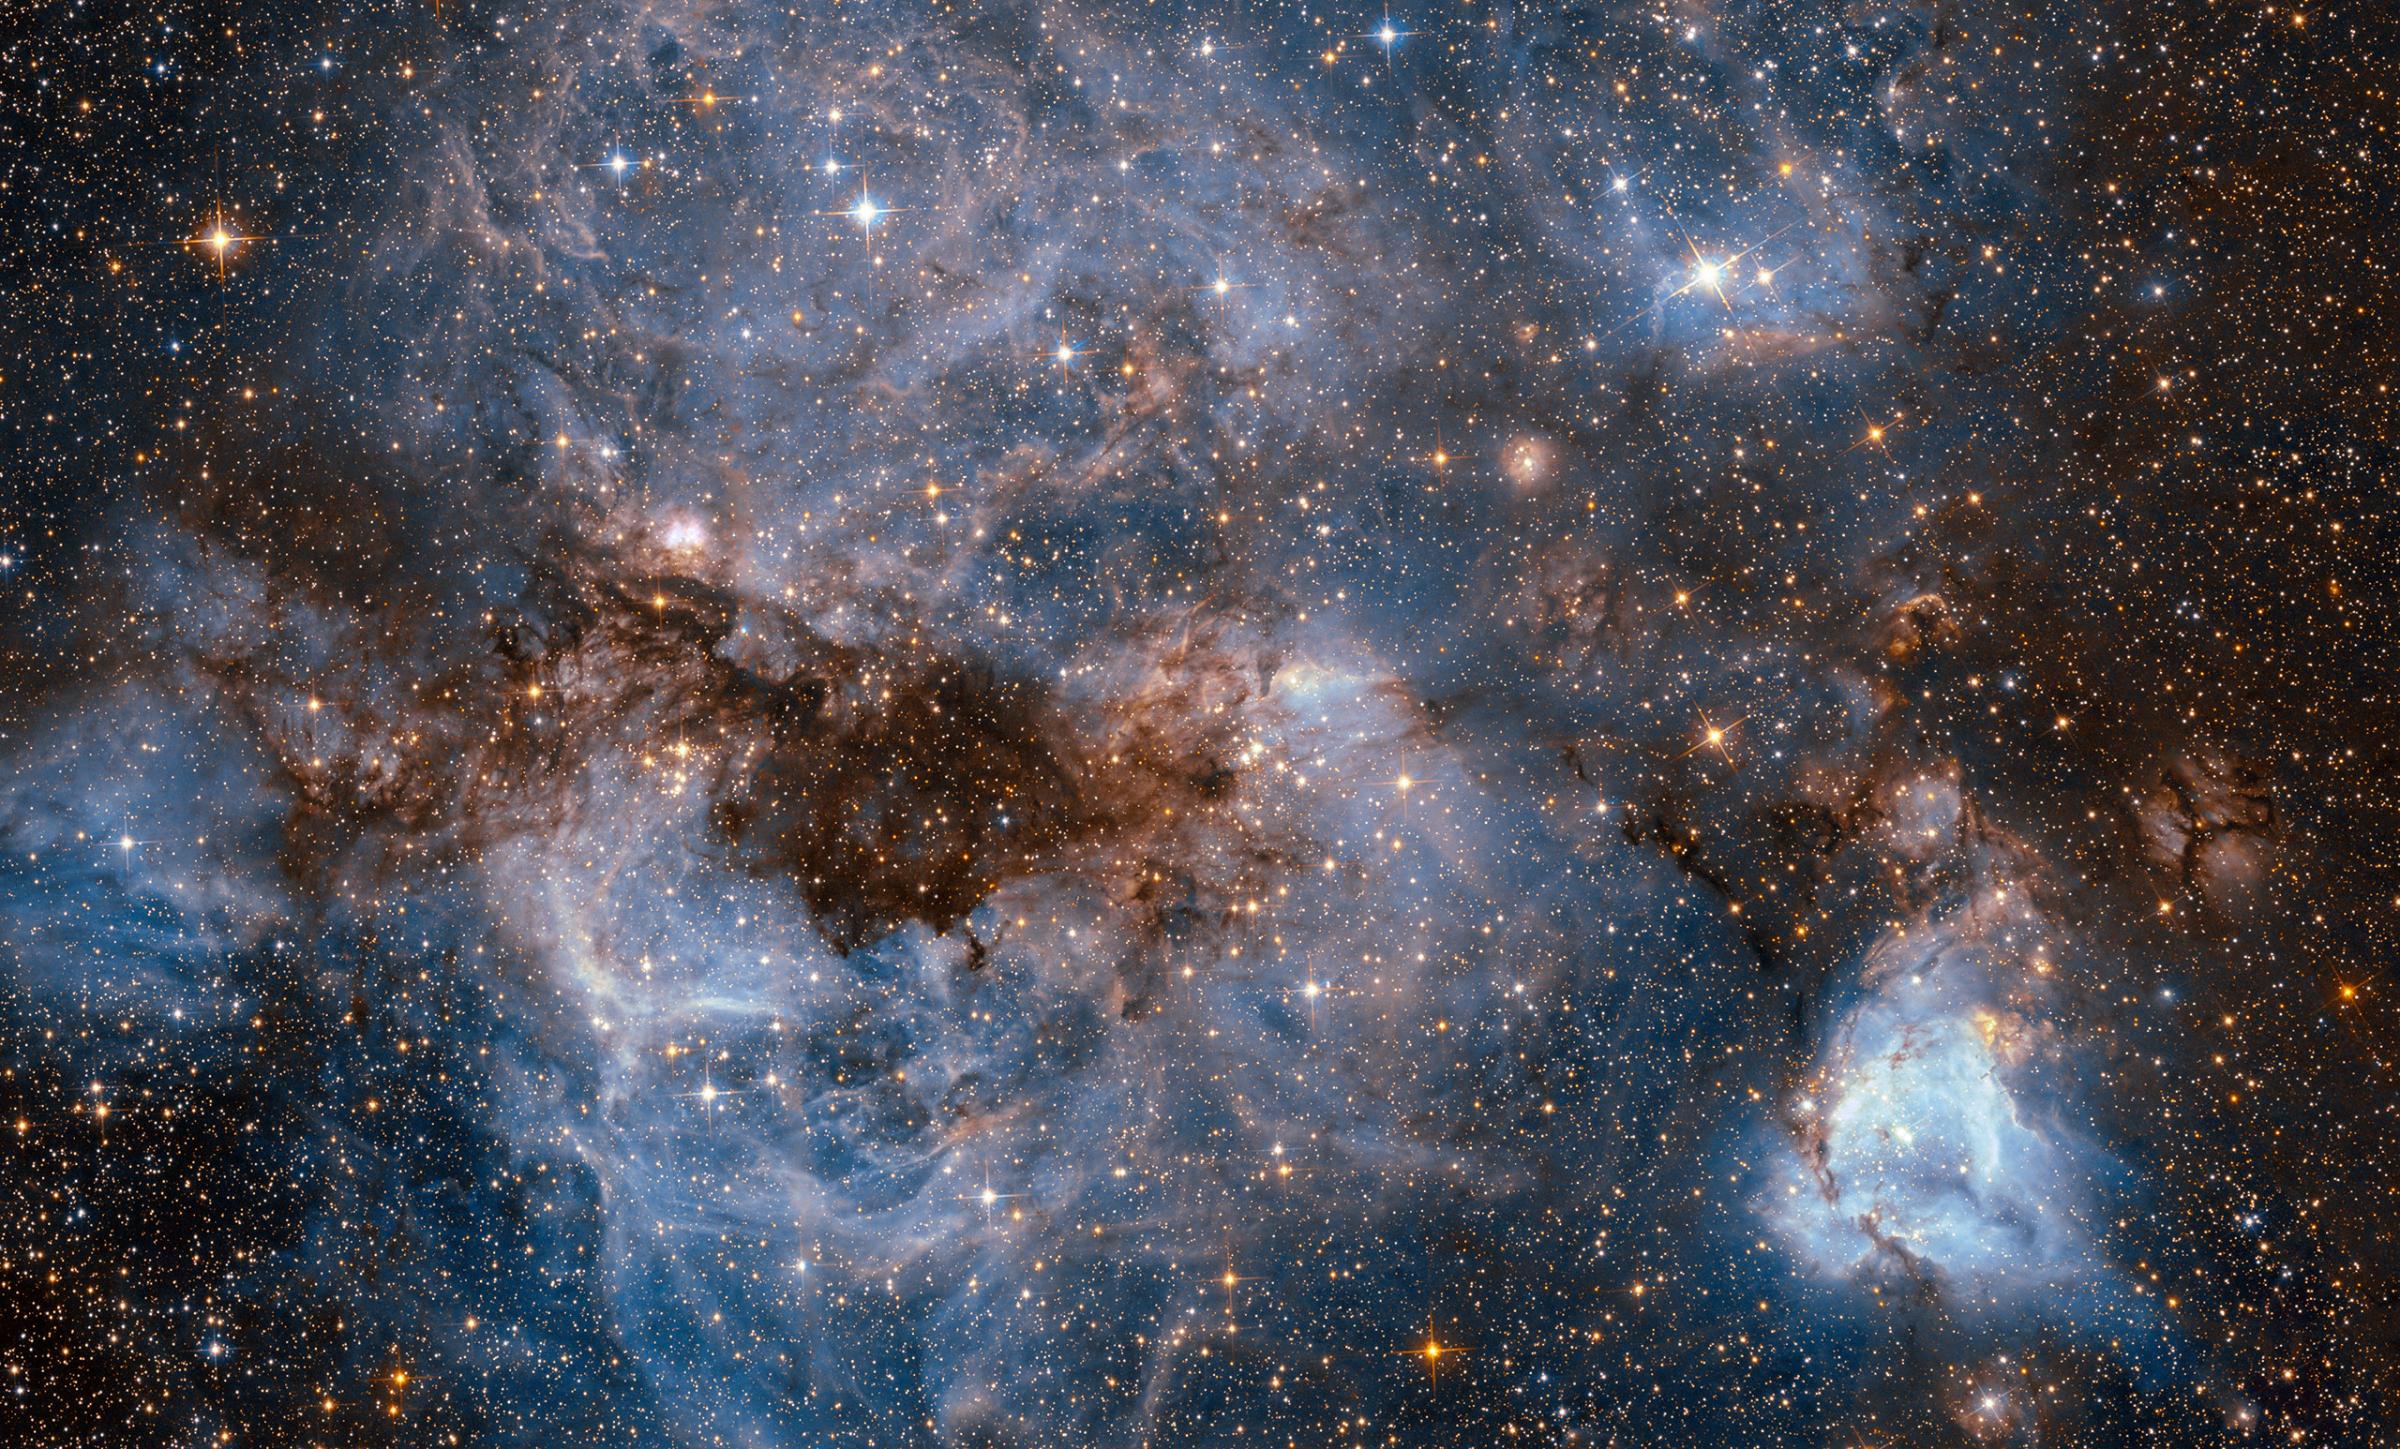 A maelstrom of glowing gas and dark dust within one of the Milky Way’s satellite galaxies, the Large Magellanic Cloud (LMC). This stormy scene shows a stellar nursery known as N159, an HII region over 150 light-years across. Sept. 5, 2016.